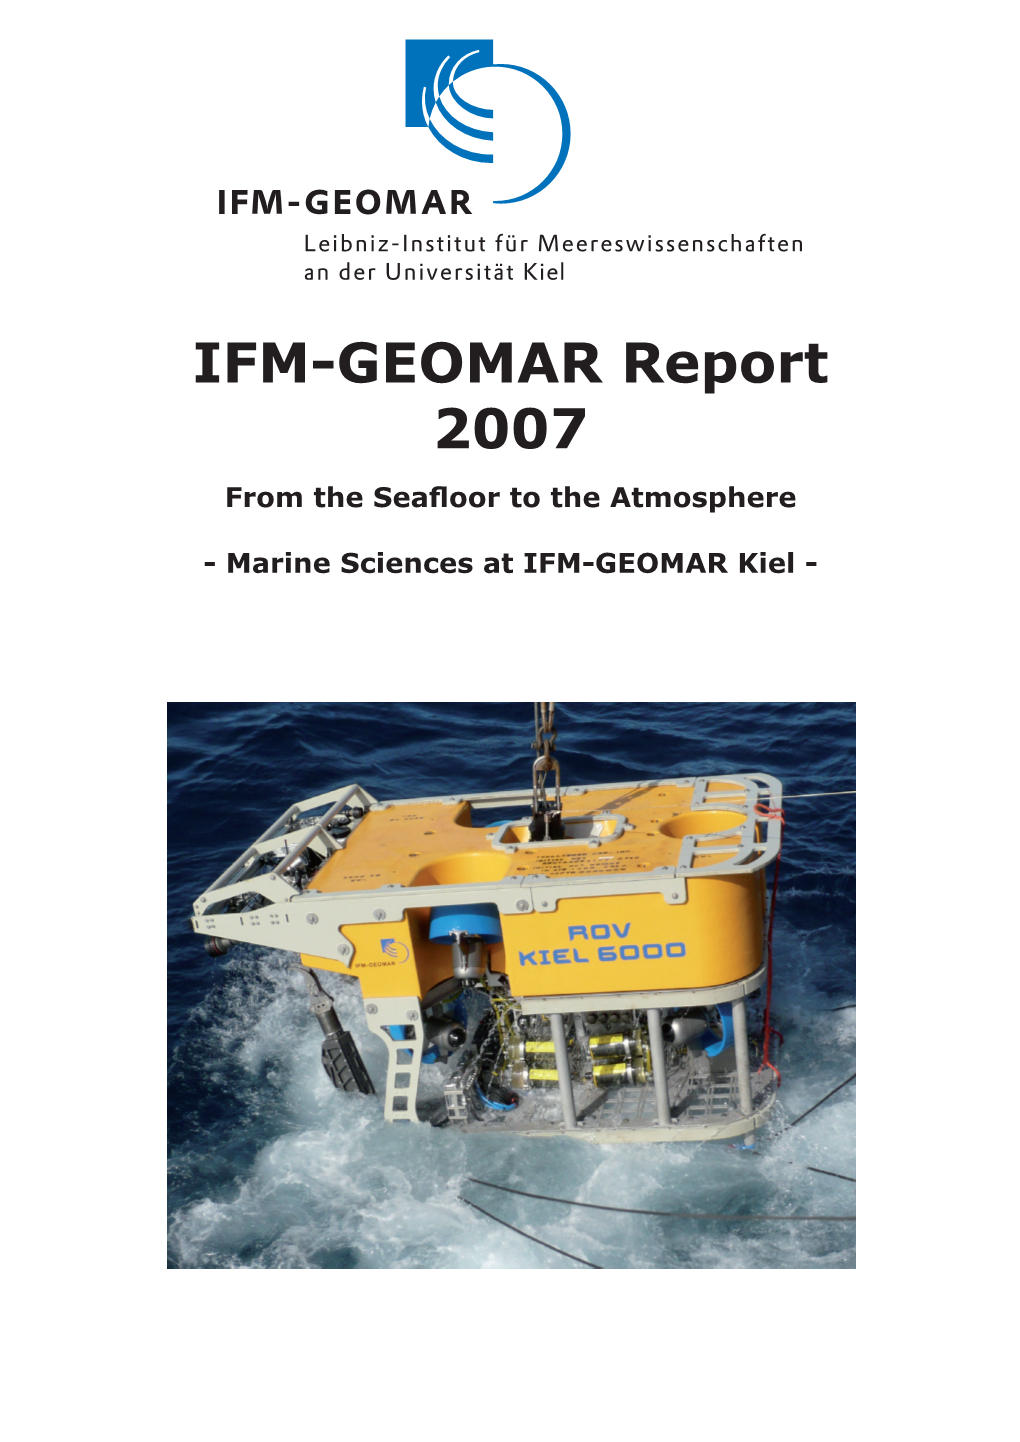 IFM-GEOMAR Report 2007 from the Seafloor to the Atmosphere